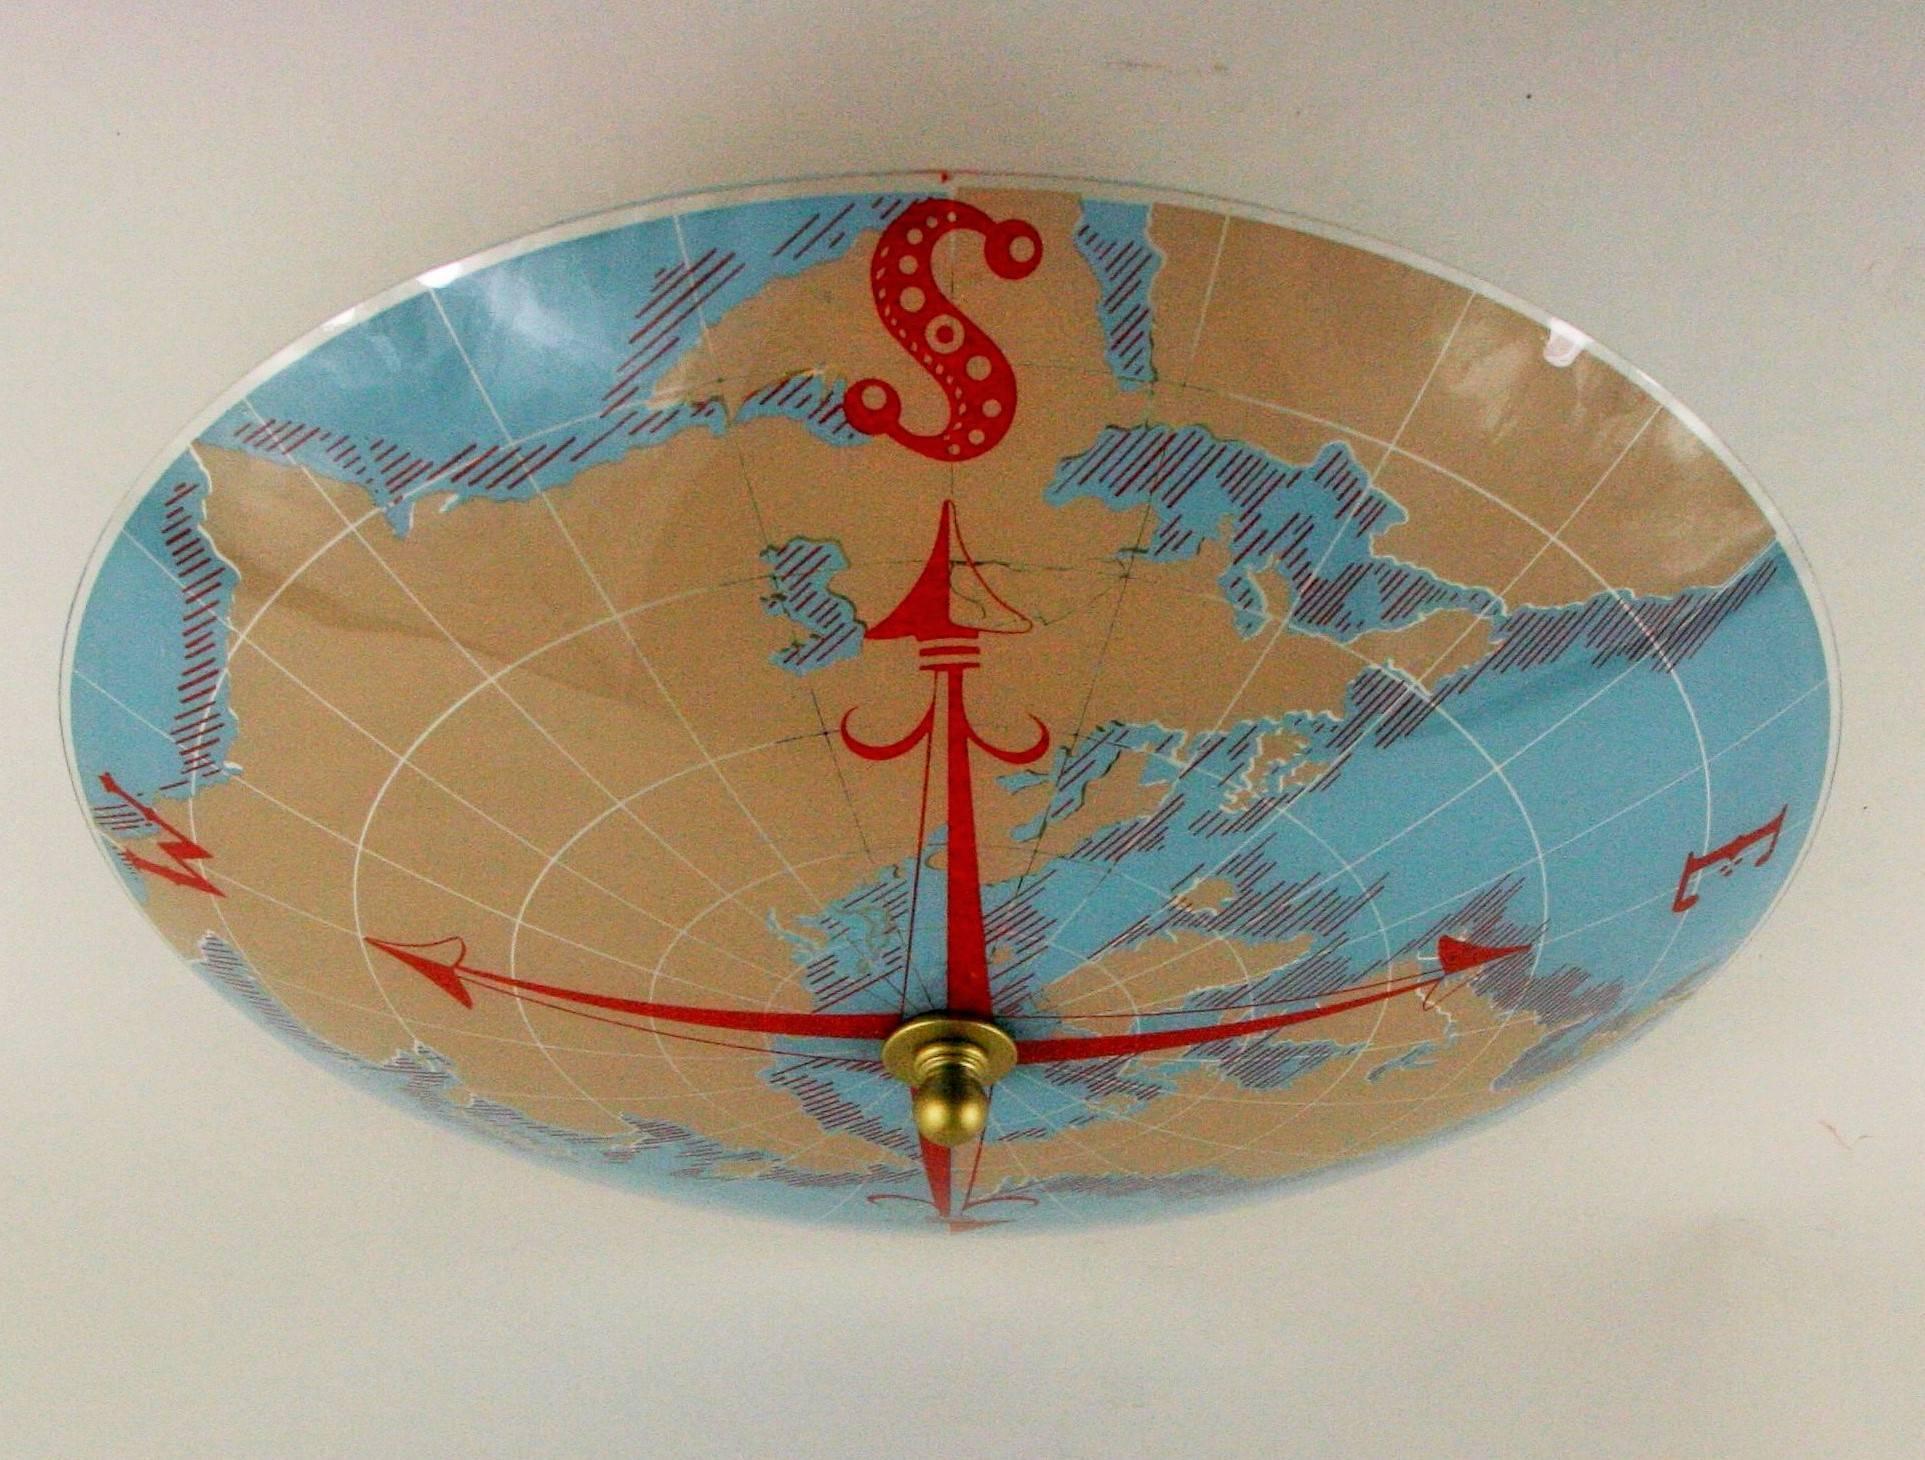 1-3018 nautical compass world map flush mount.
Take 3 Edison based 60 watt bulbs.
Other colors available see 1-3019   1-3020